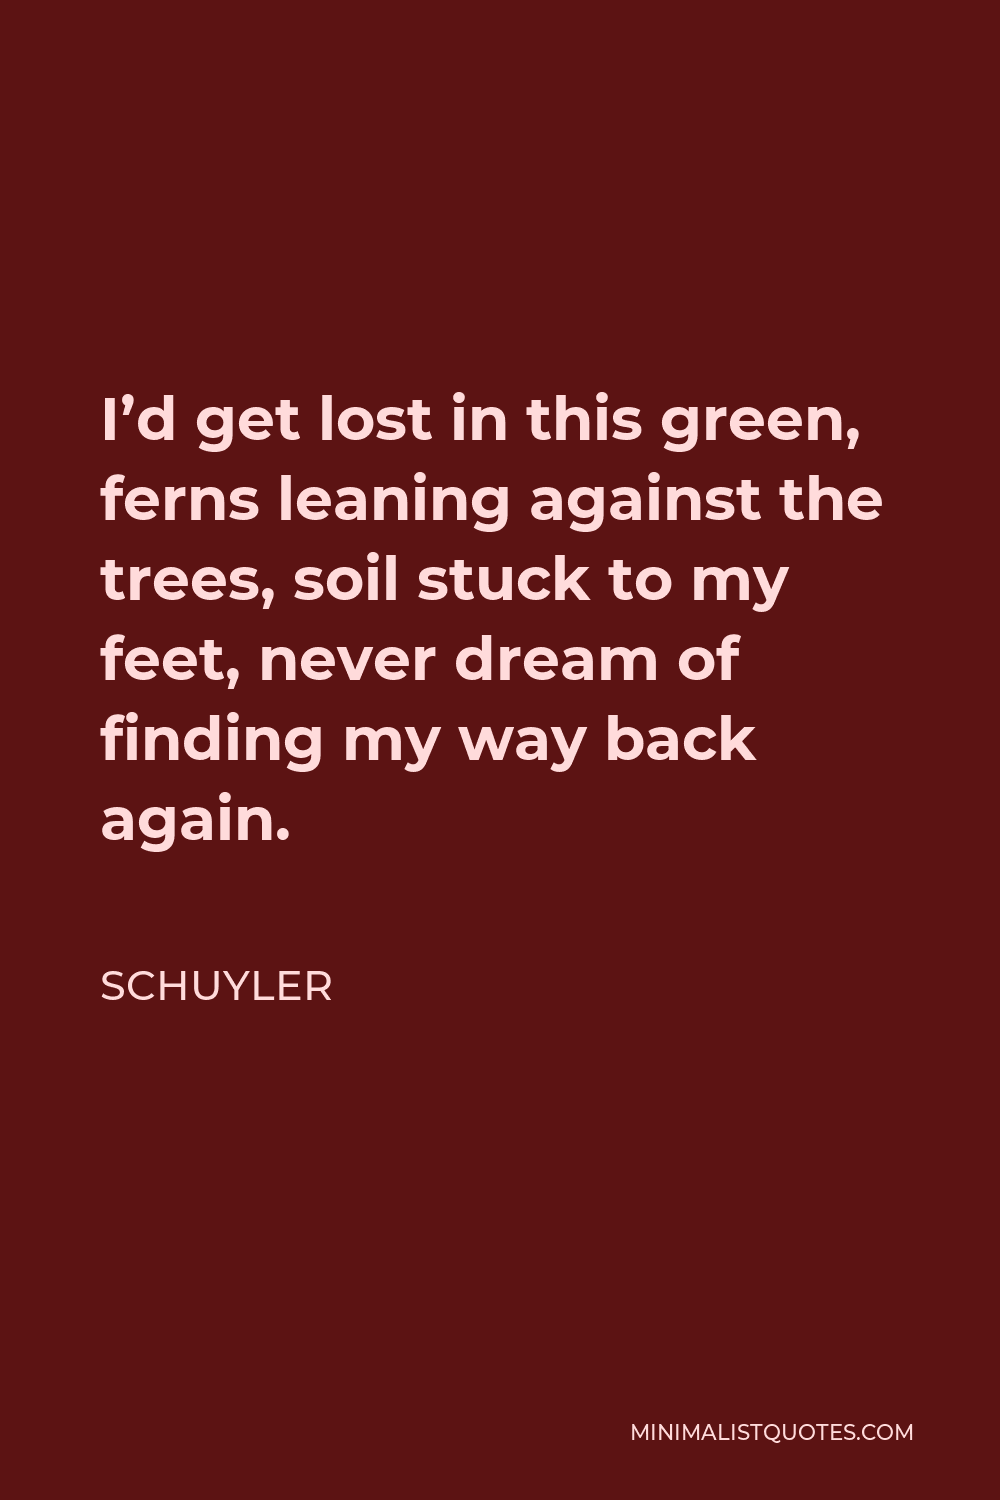 Schuyler Quote - I’d get lost in this green, ferns leaning against the trees, soil stuck to my feet, never dream of finding my way back again.